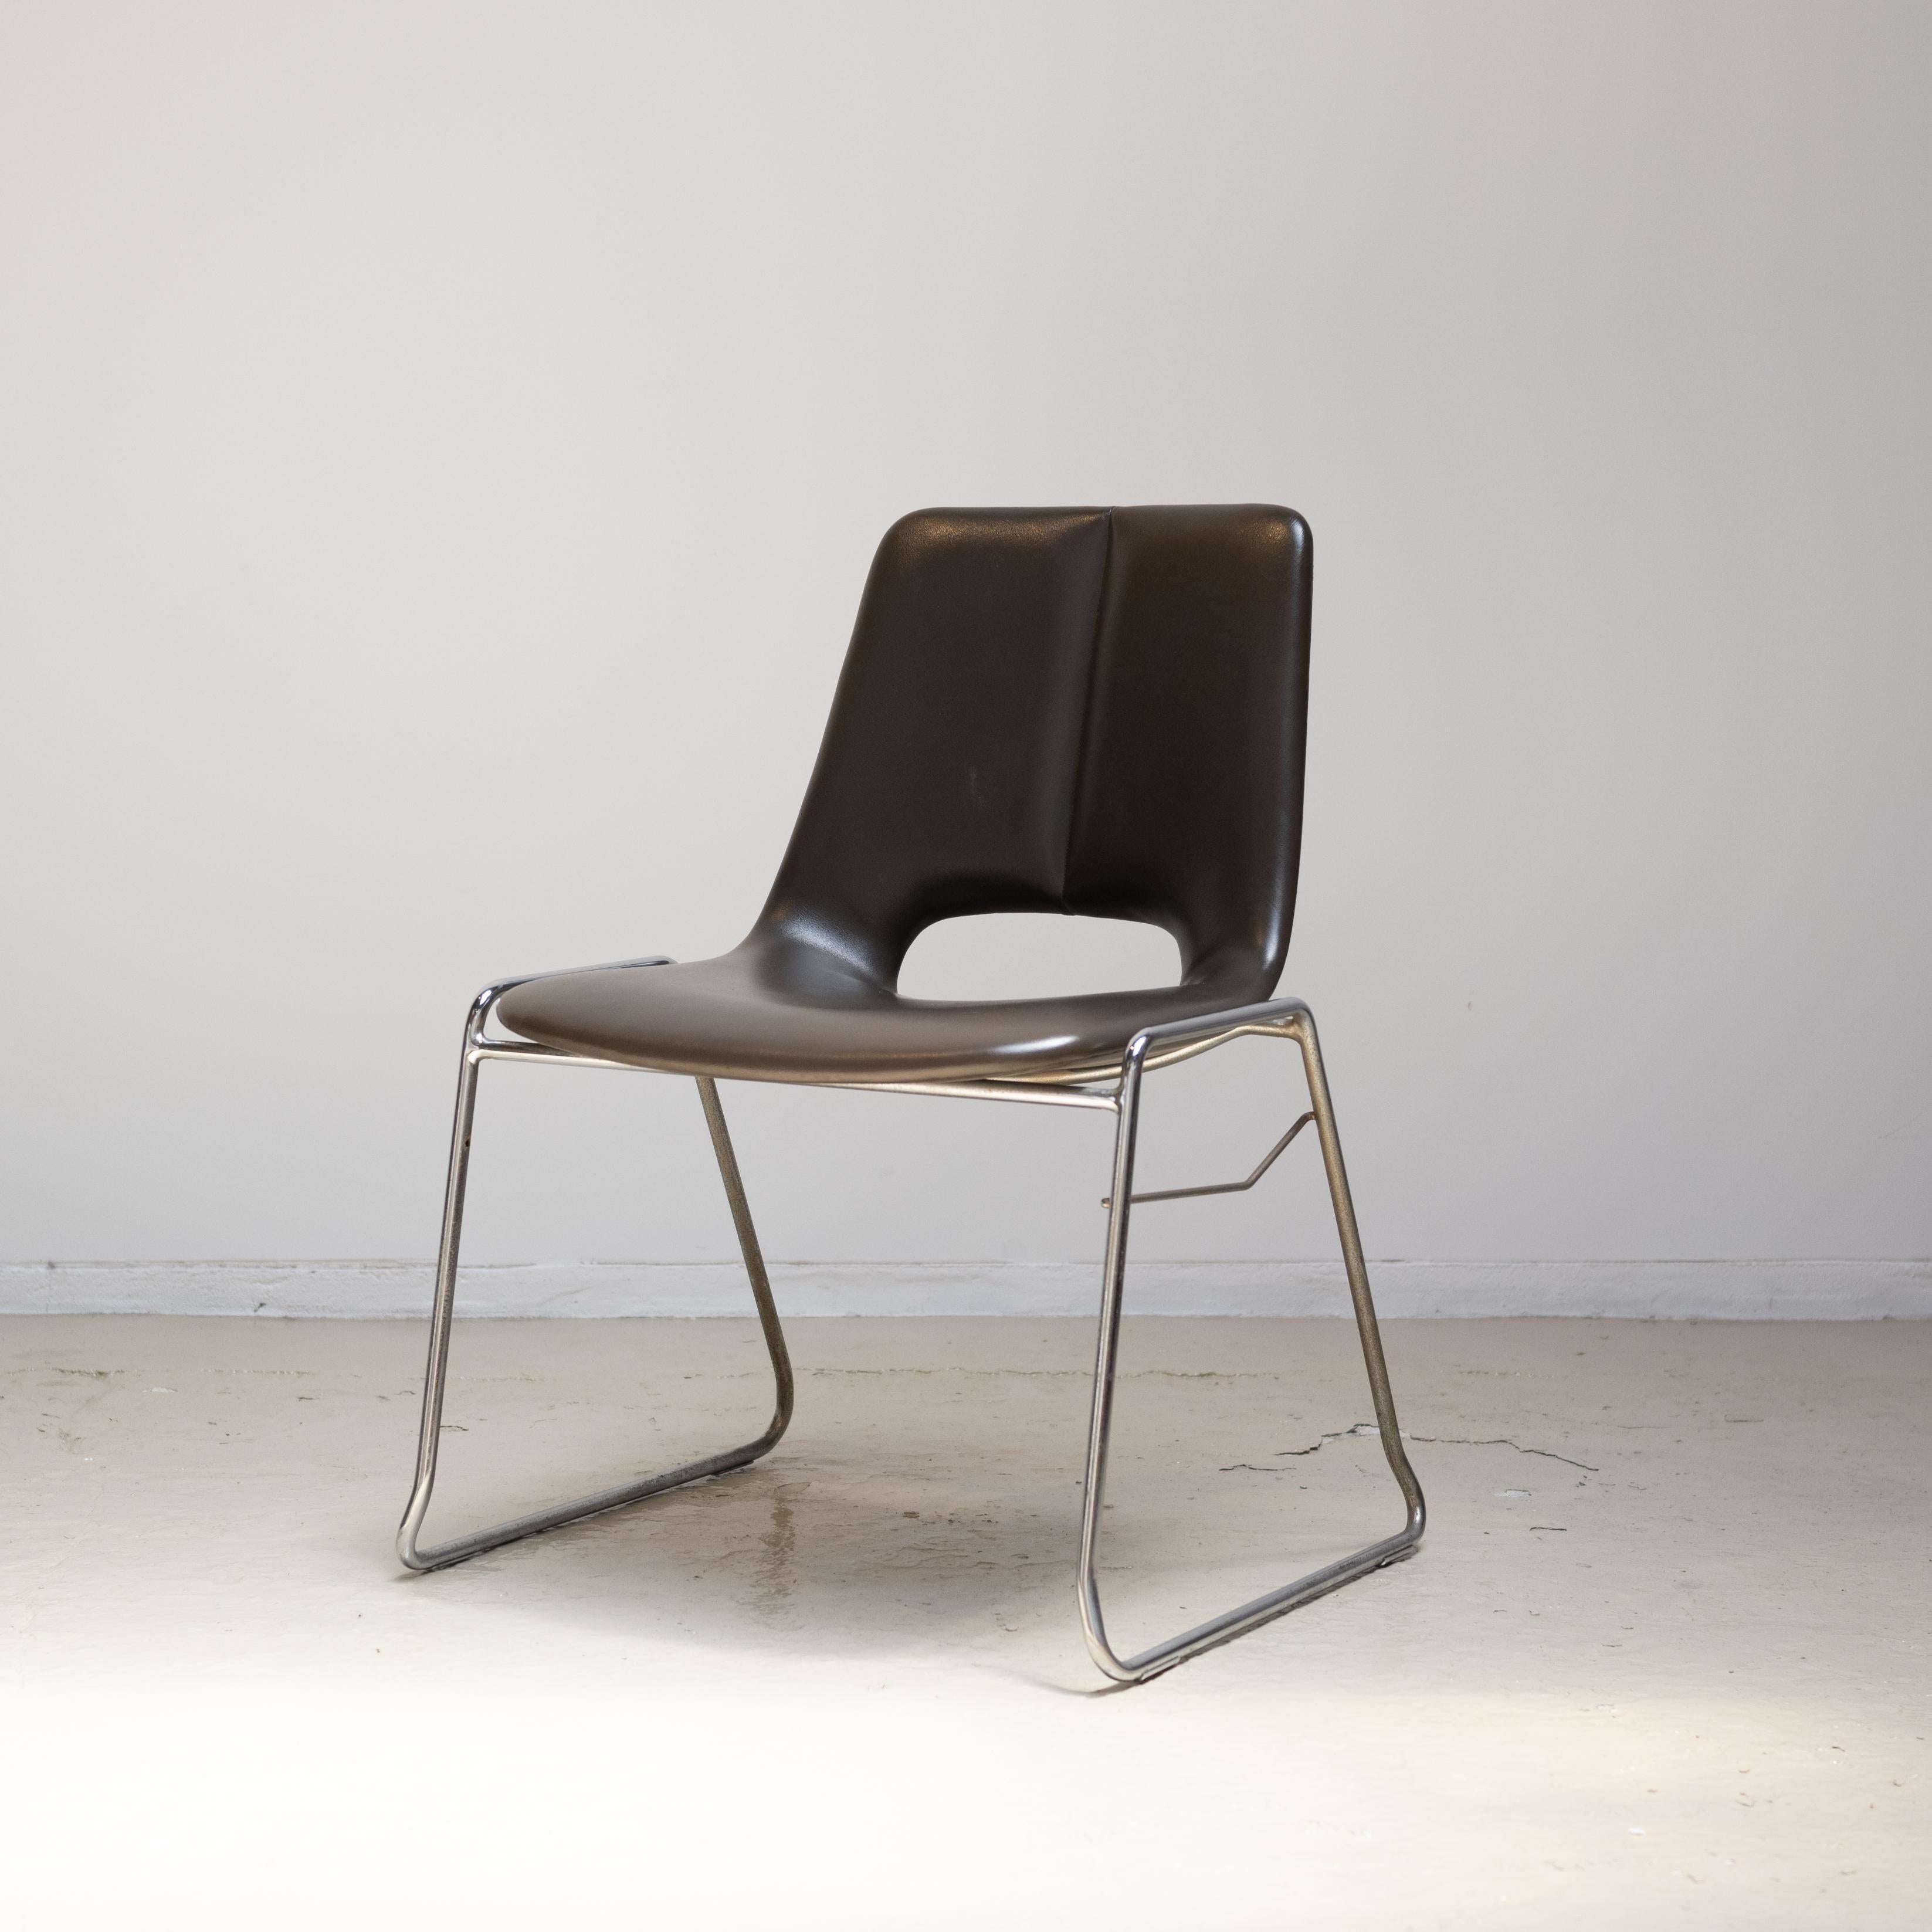 A chair that designed and manufactured by Tendo Mokko.
This model had been manufactured and sold during 1974 to 1979.
Designed to be stacked.
Faux Leather and metal.
A bar between the right legs is missing.


